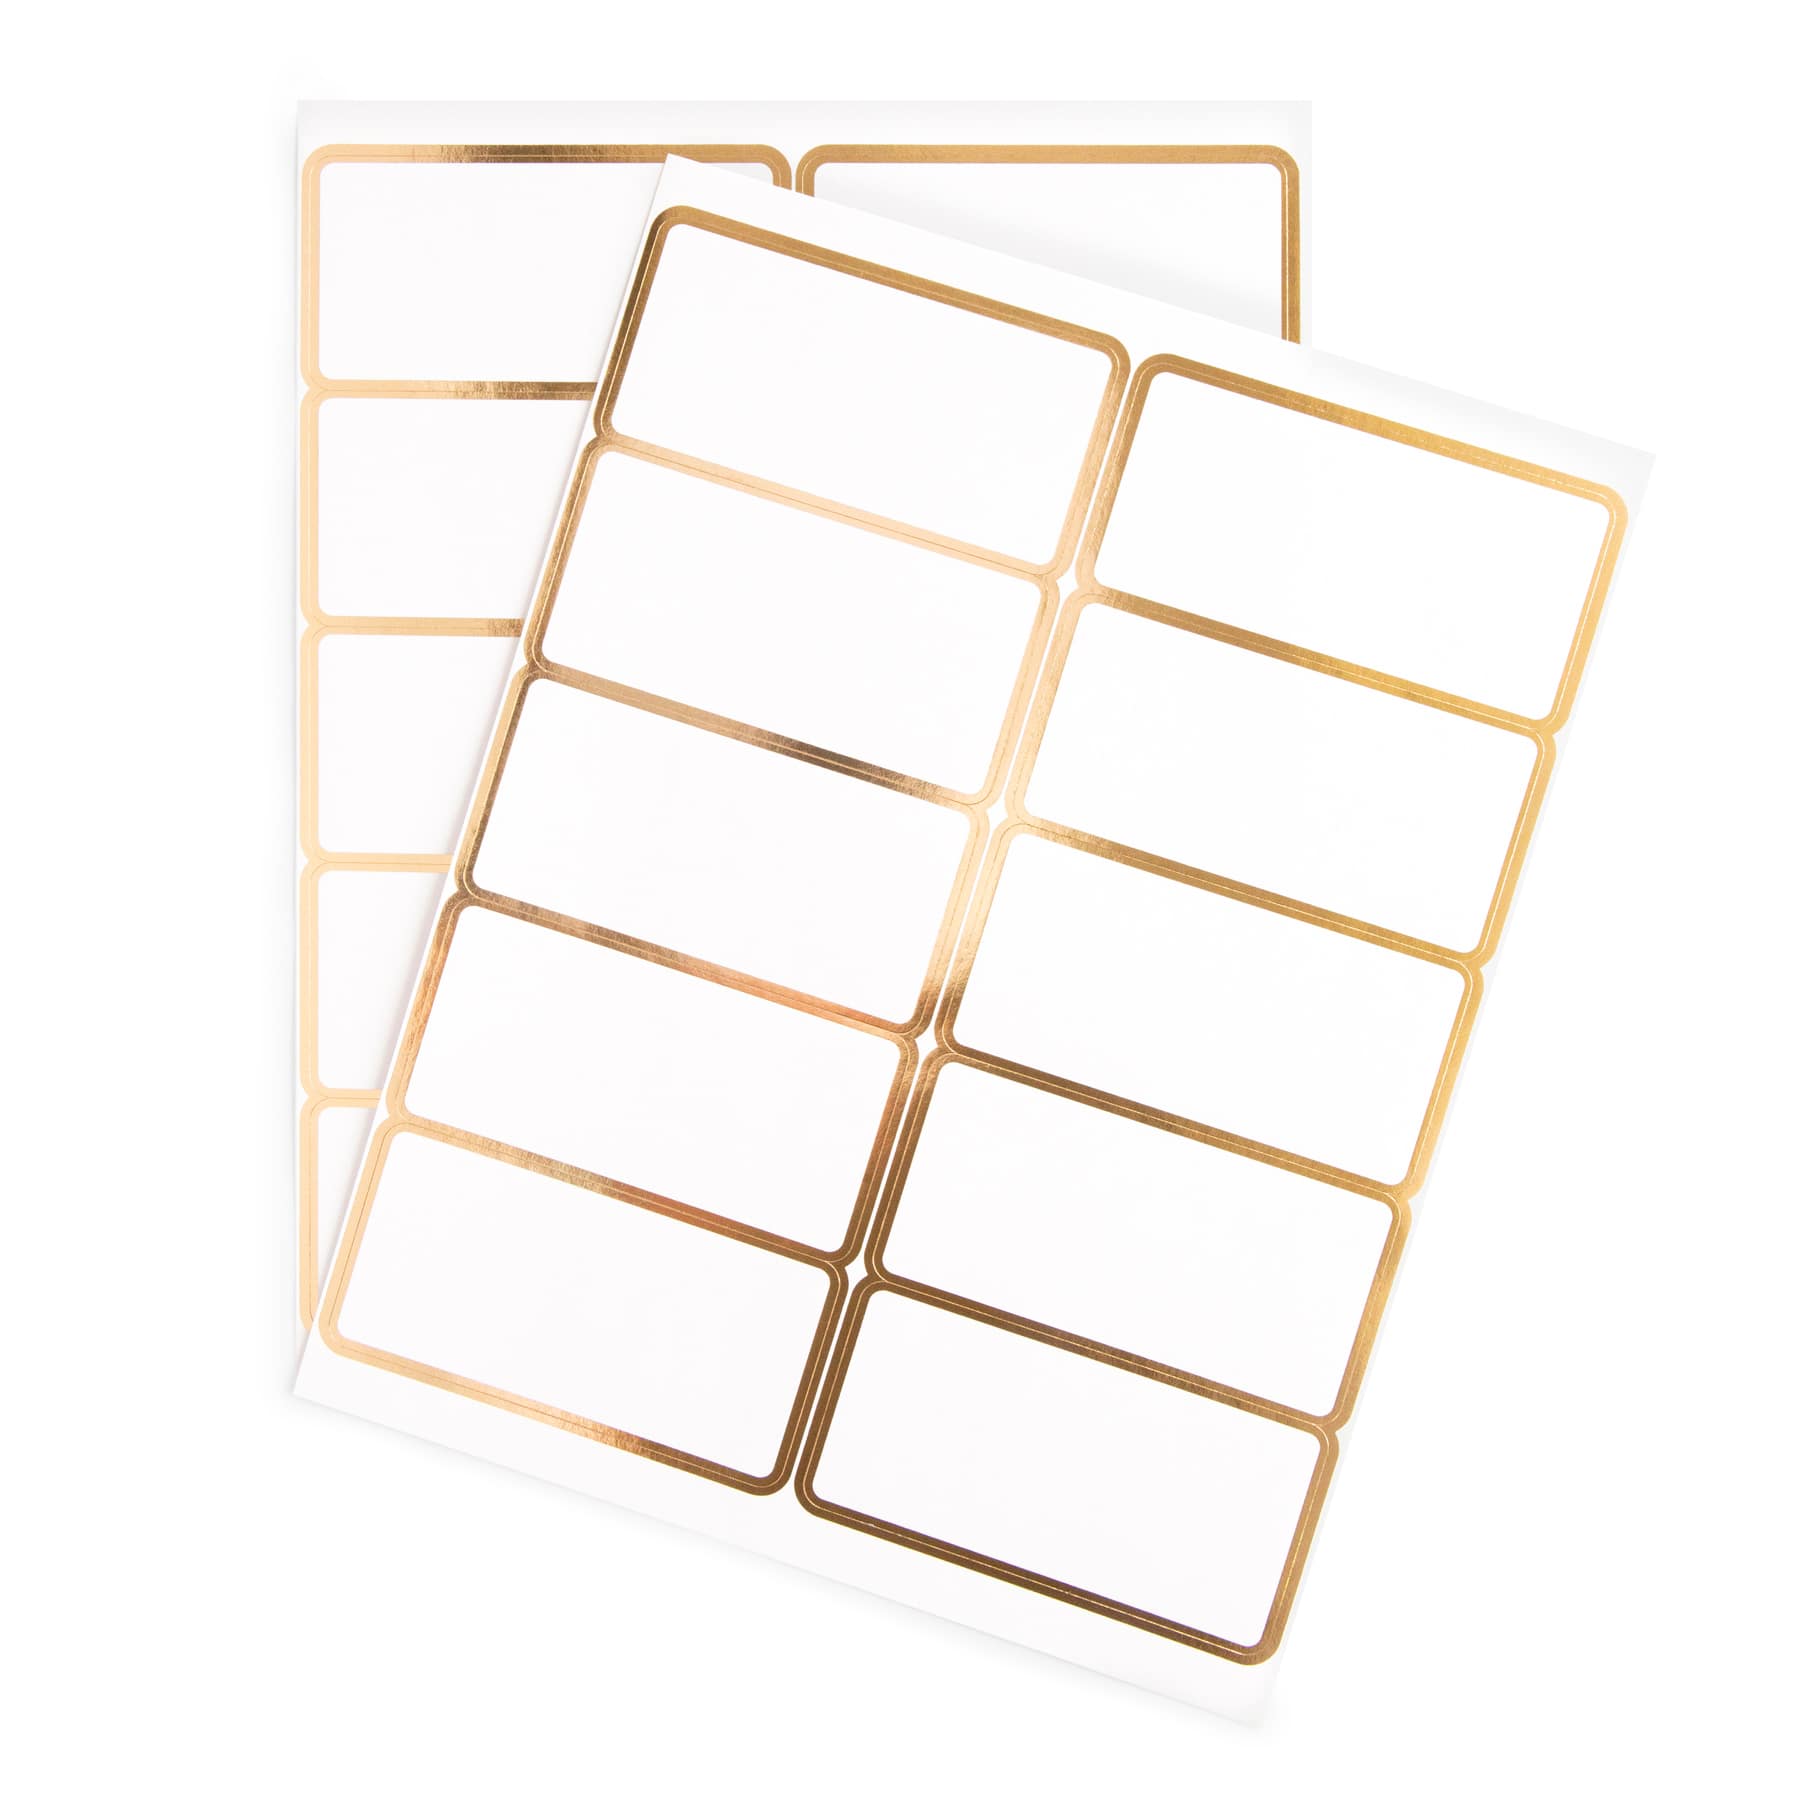 Custom printed shipping labels Metallic gold rectangle stickers quality x 50 